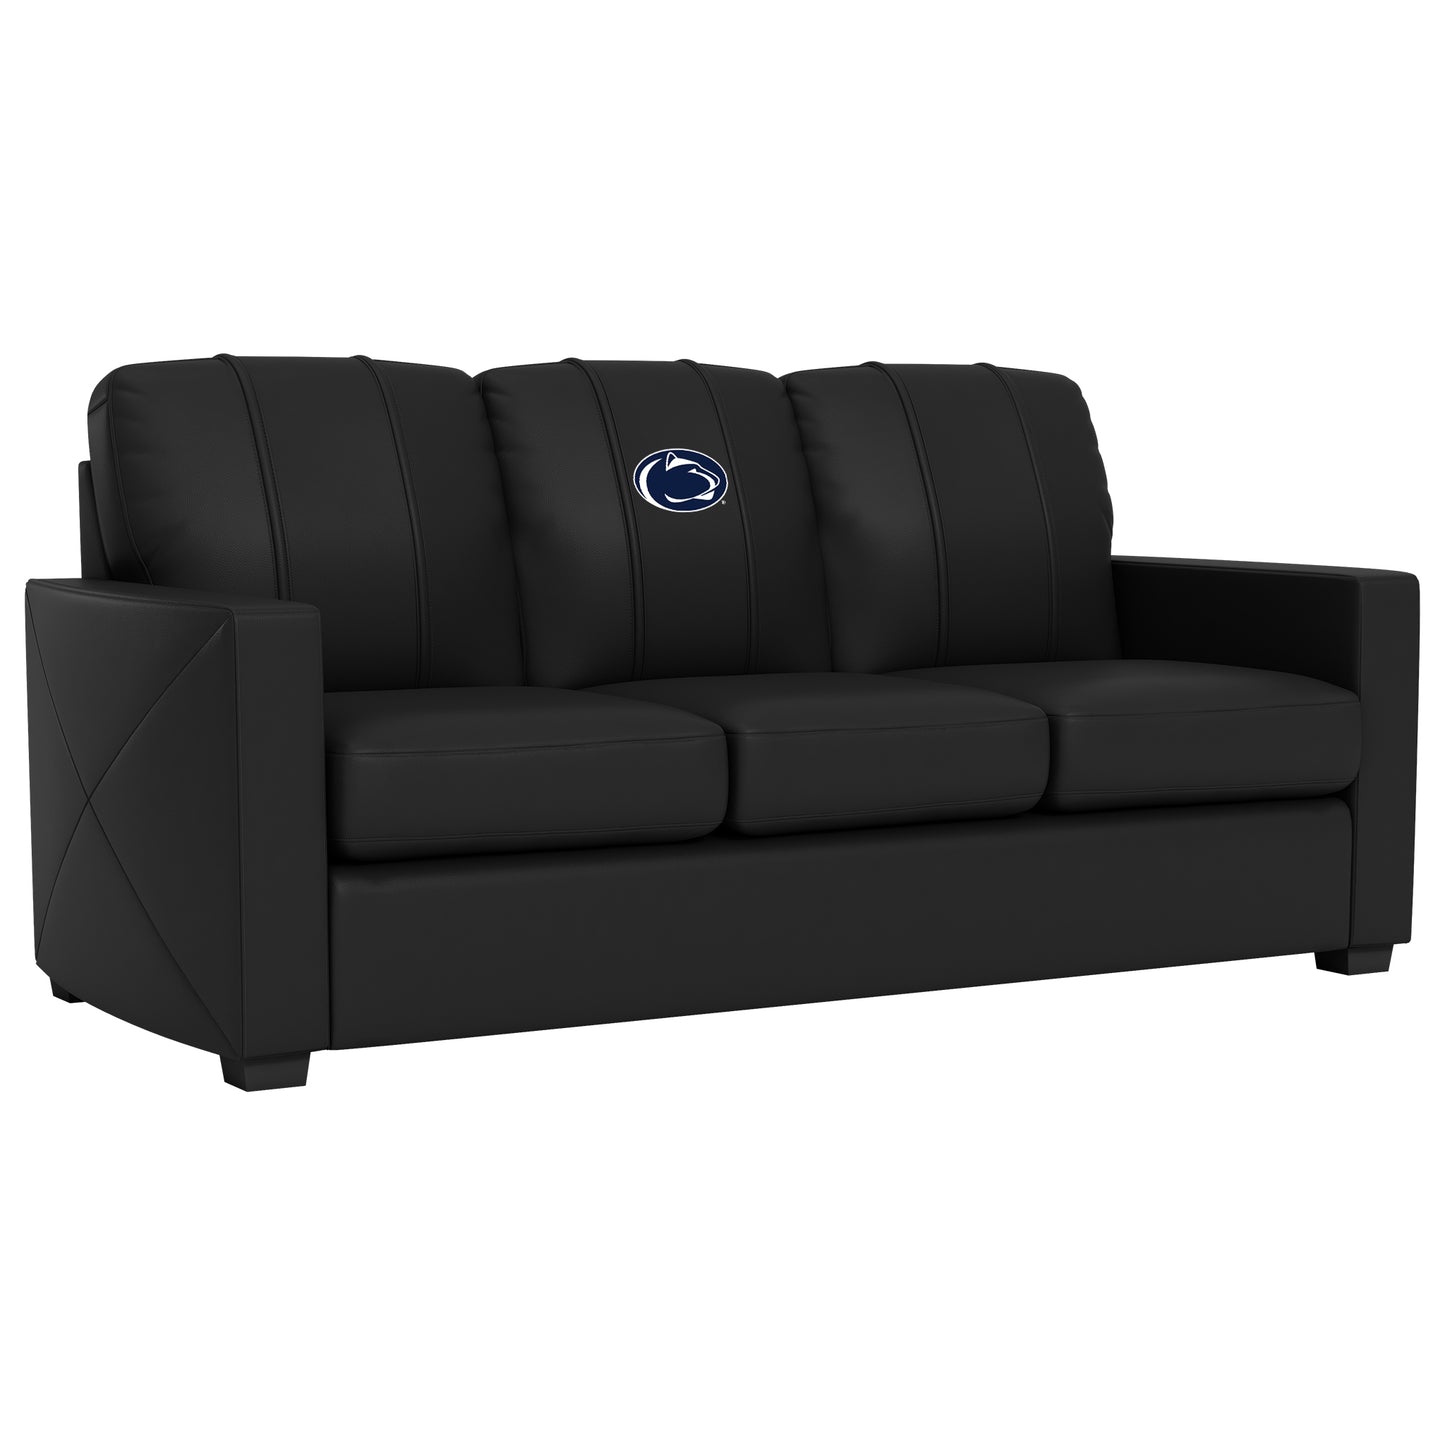 Silver Sofa with Penn State Nittany Lions Logo